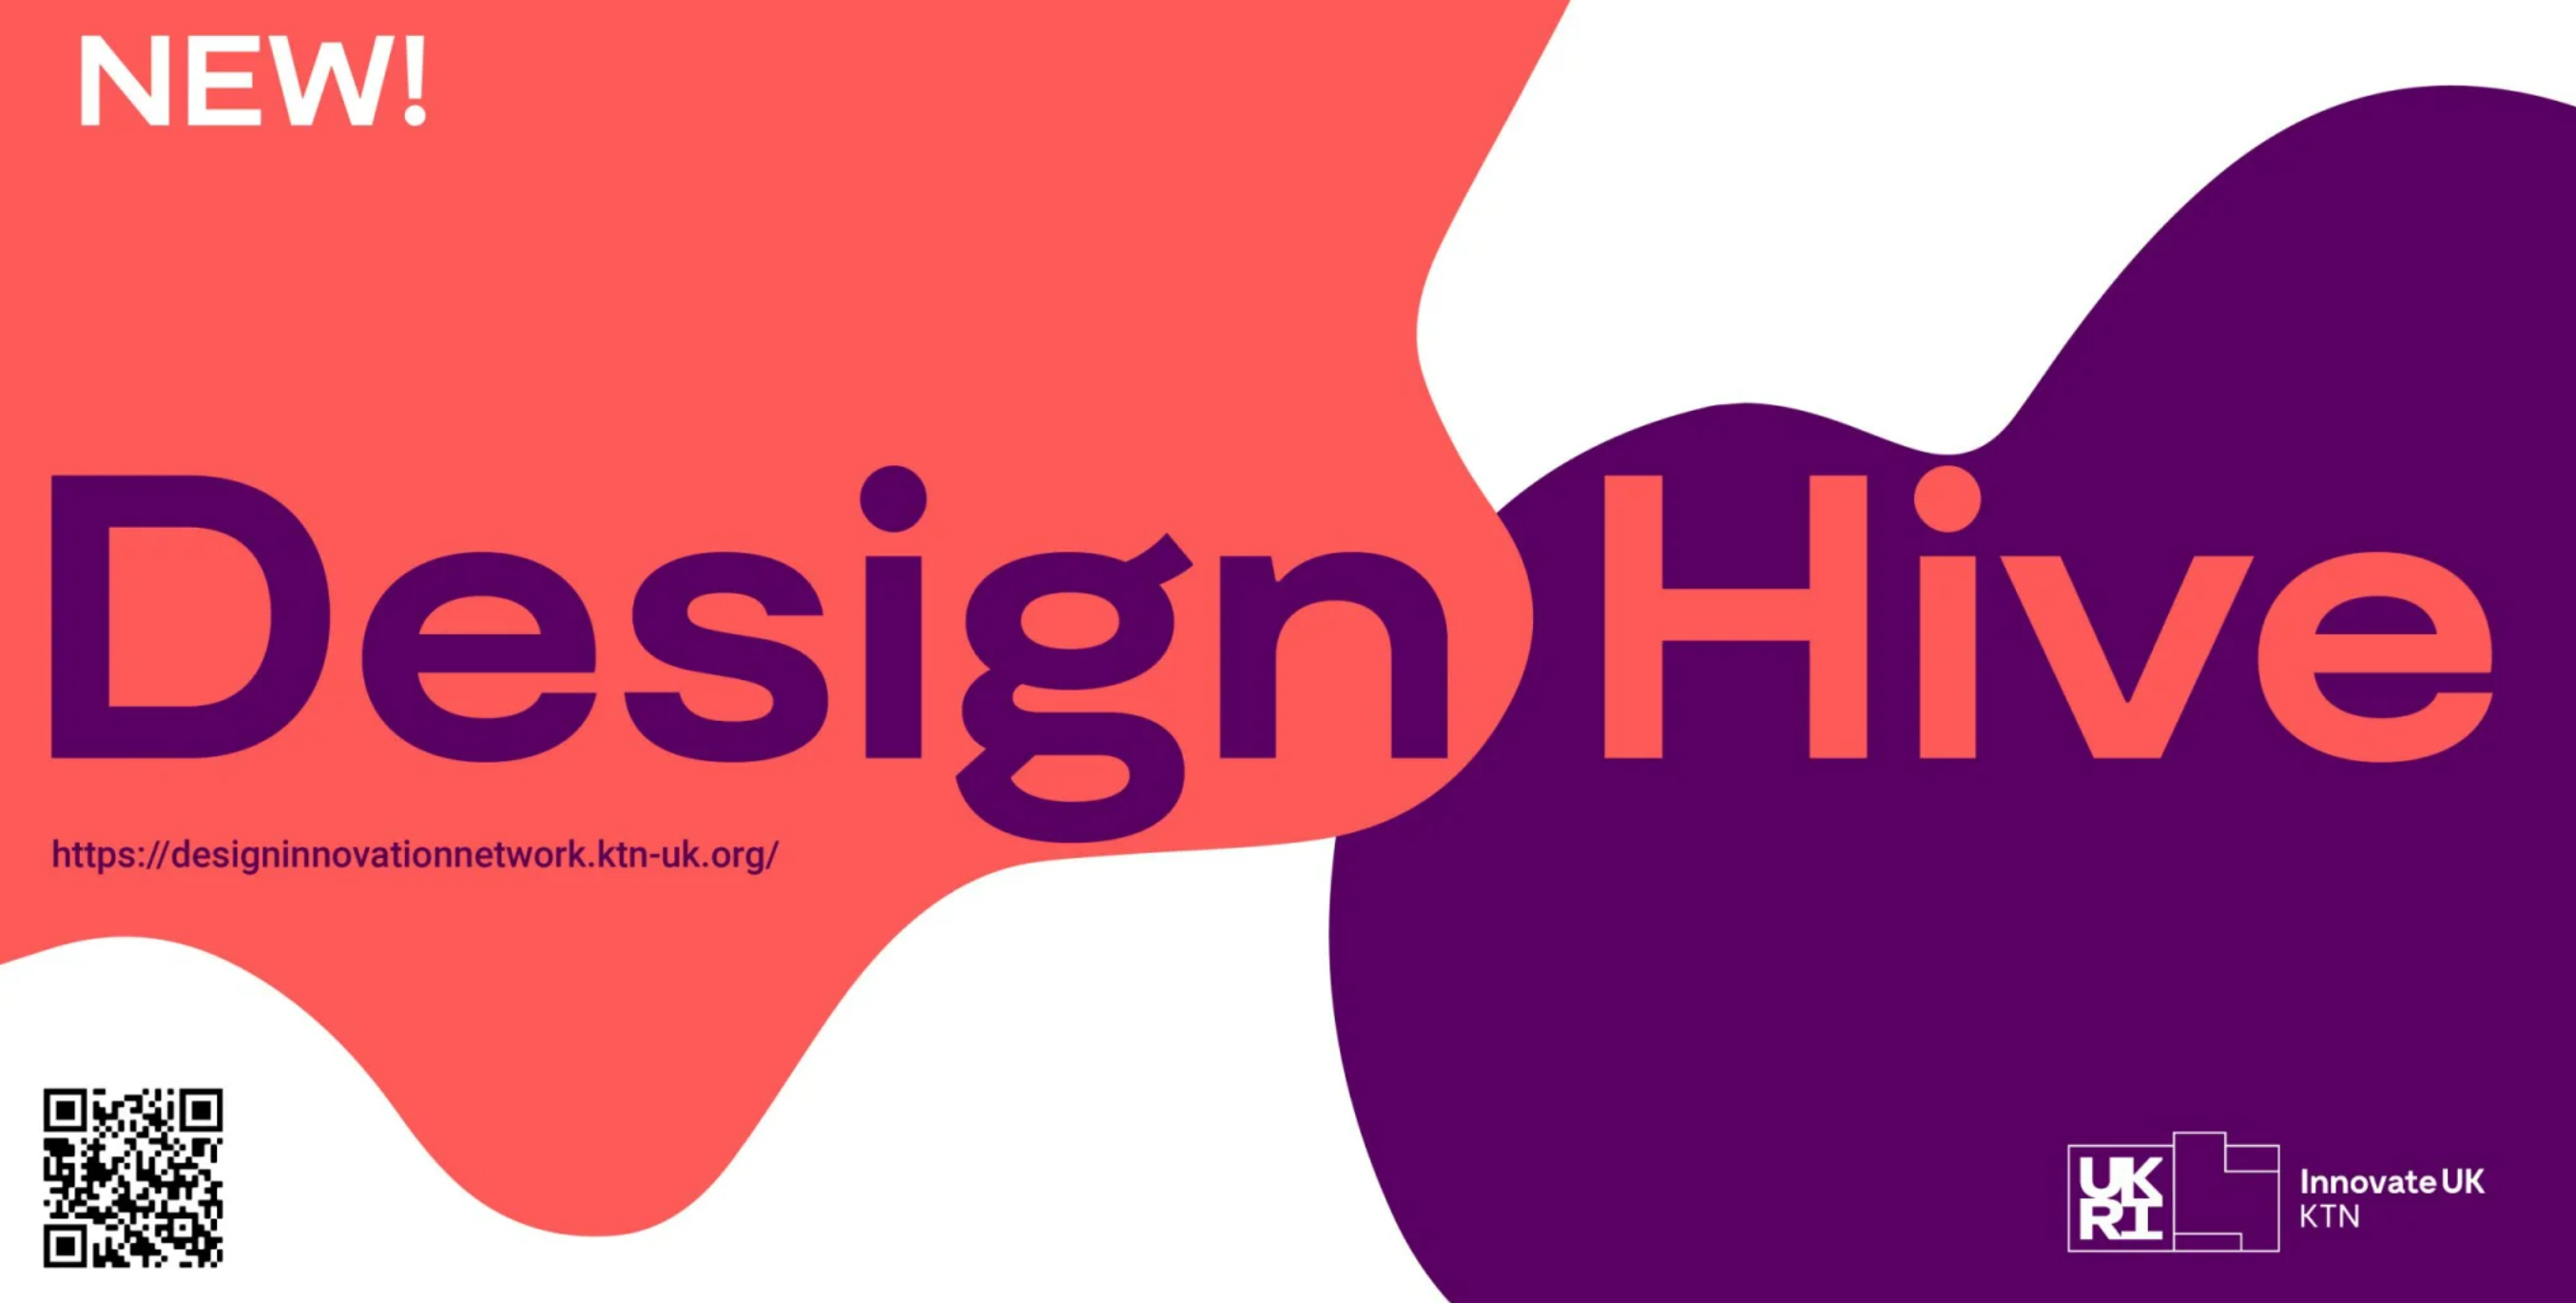 New programmes for design in the UK